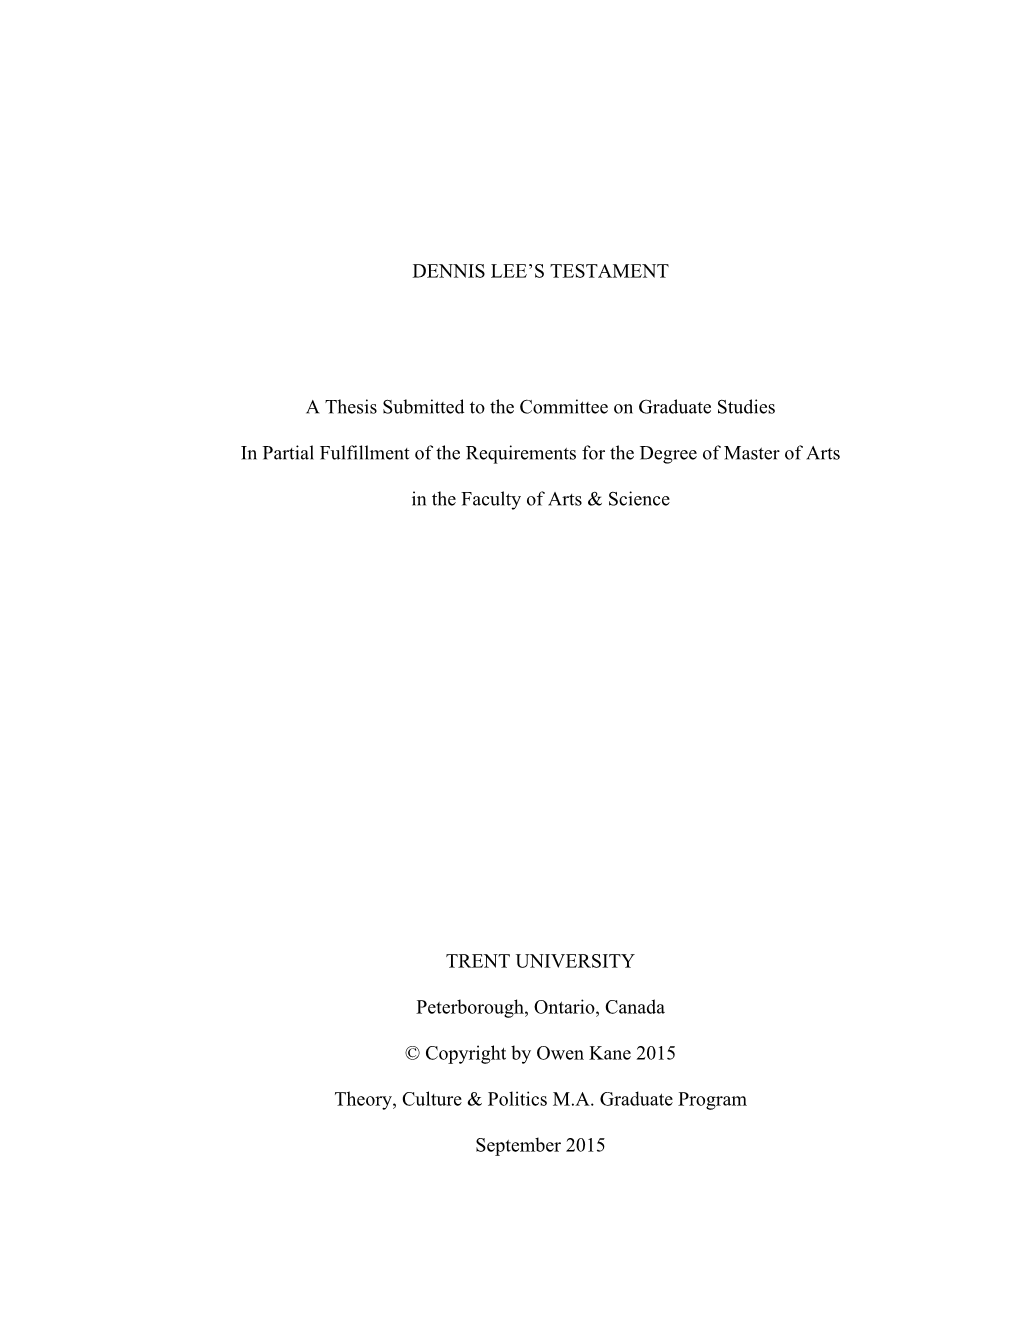 DENNIS LEE's TESTAMENT a Thesis Submitted to the Committee On